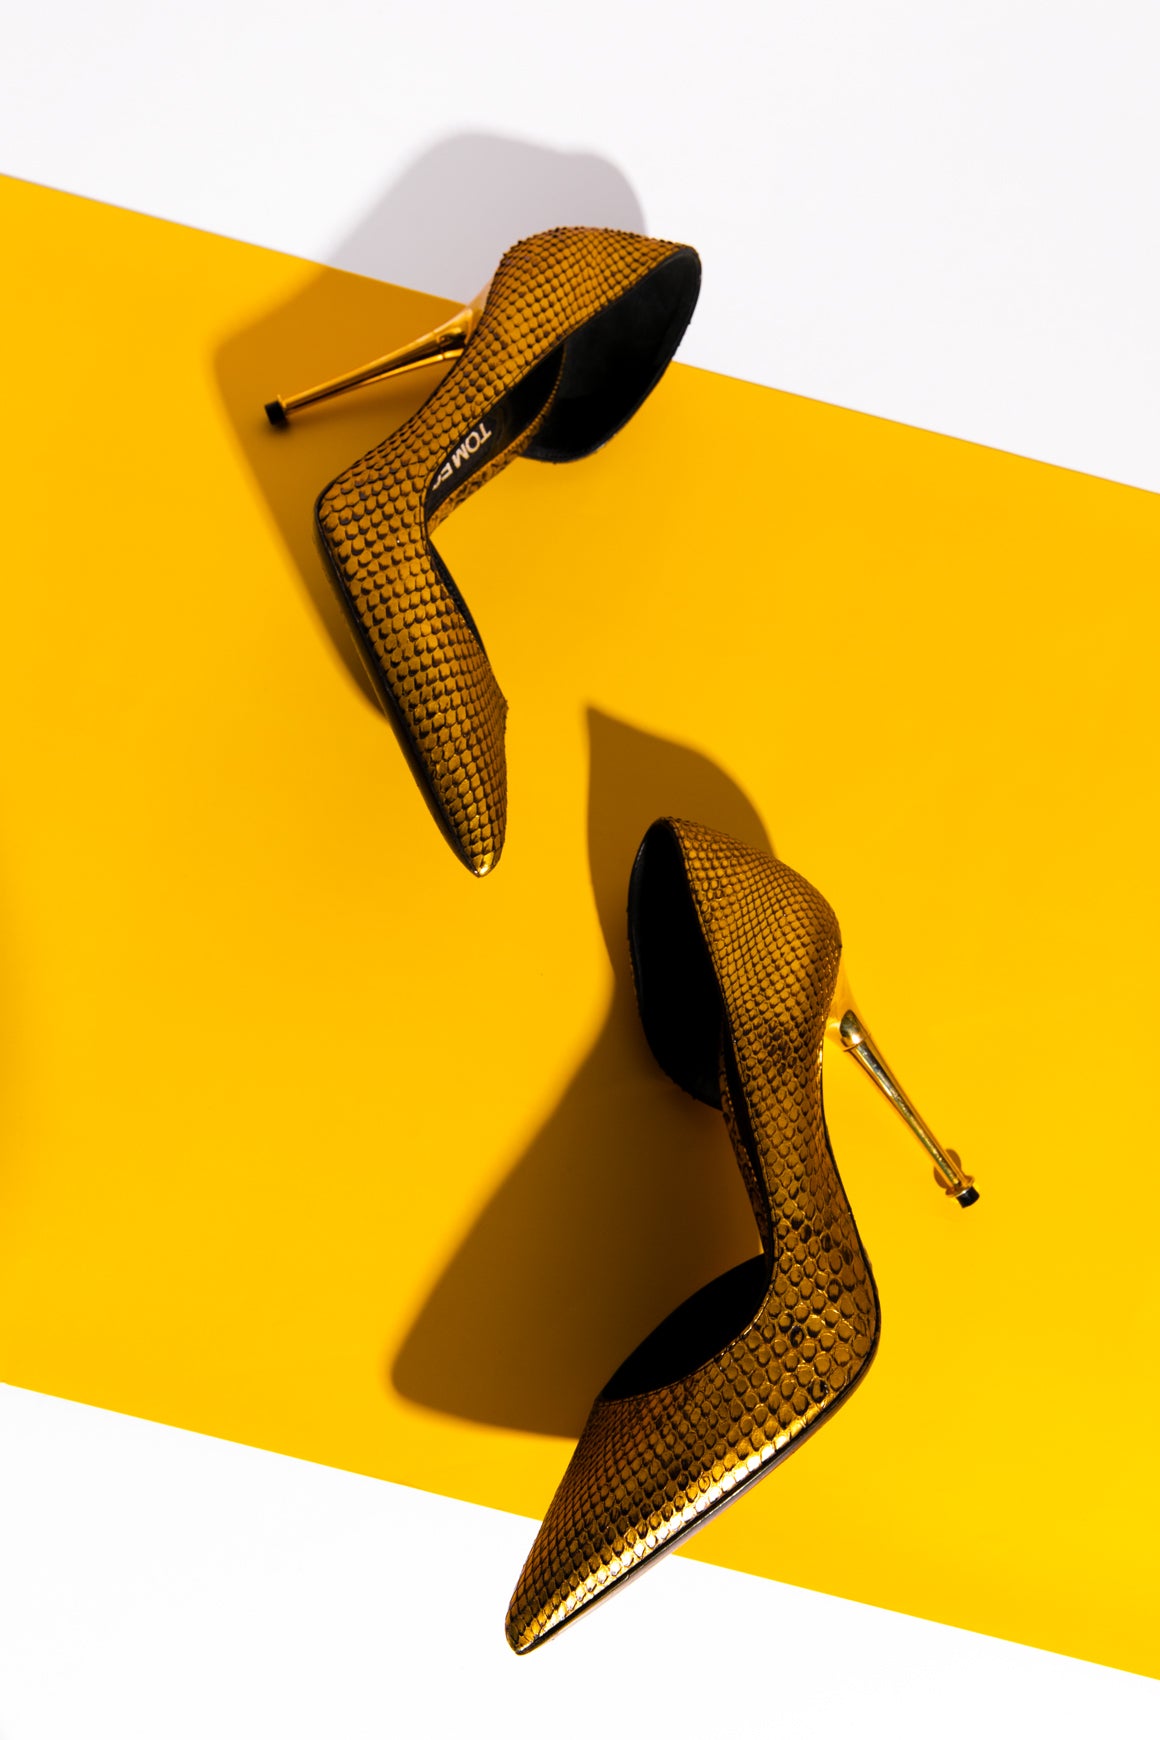 TOM FORD Gold Scaled Pumps (Sz. 36.5)